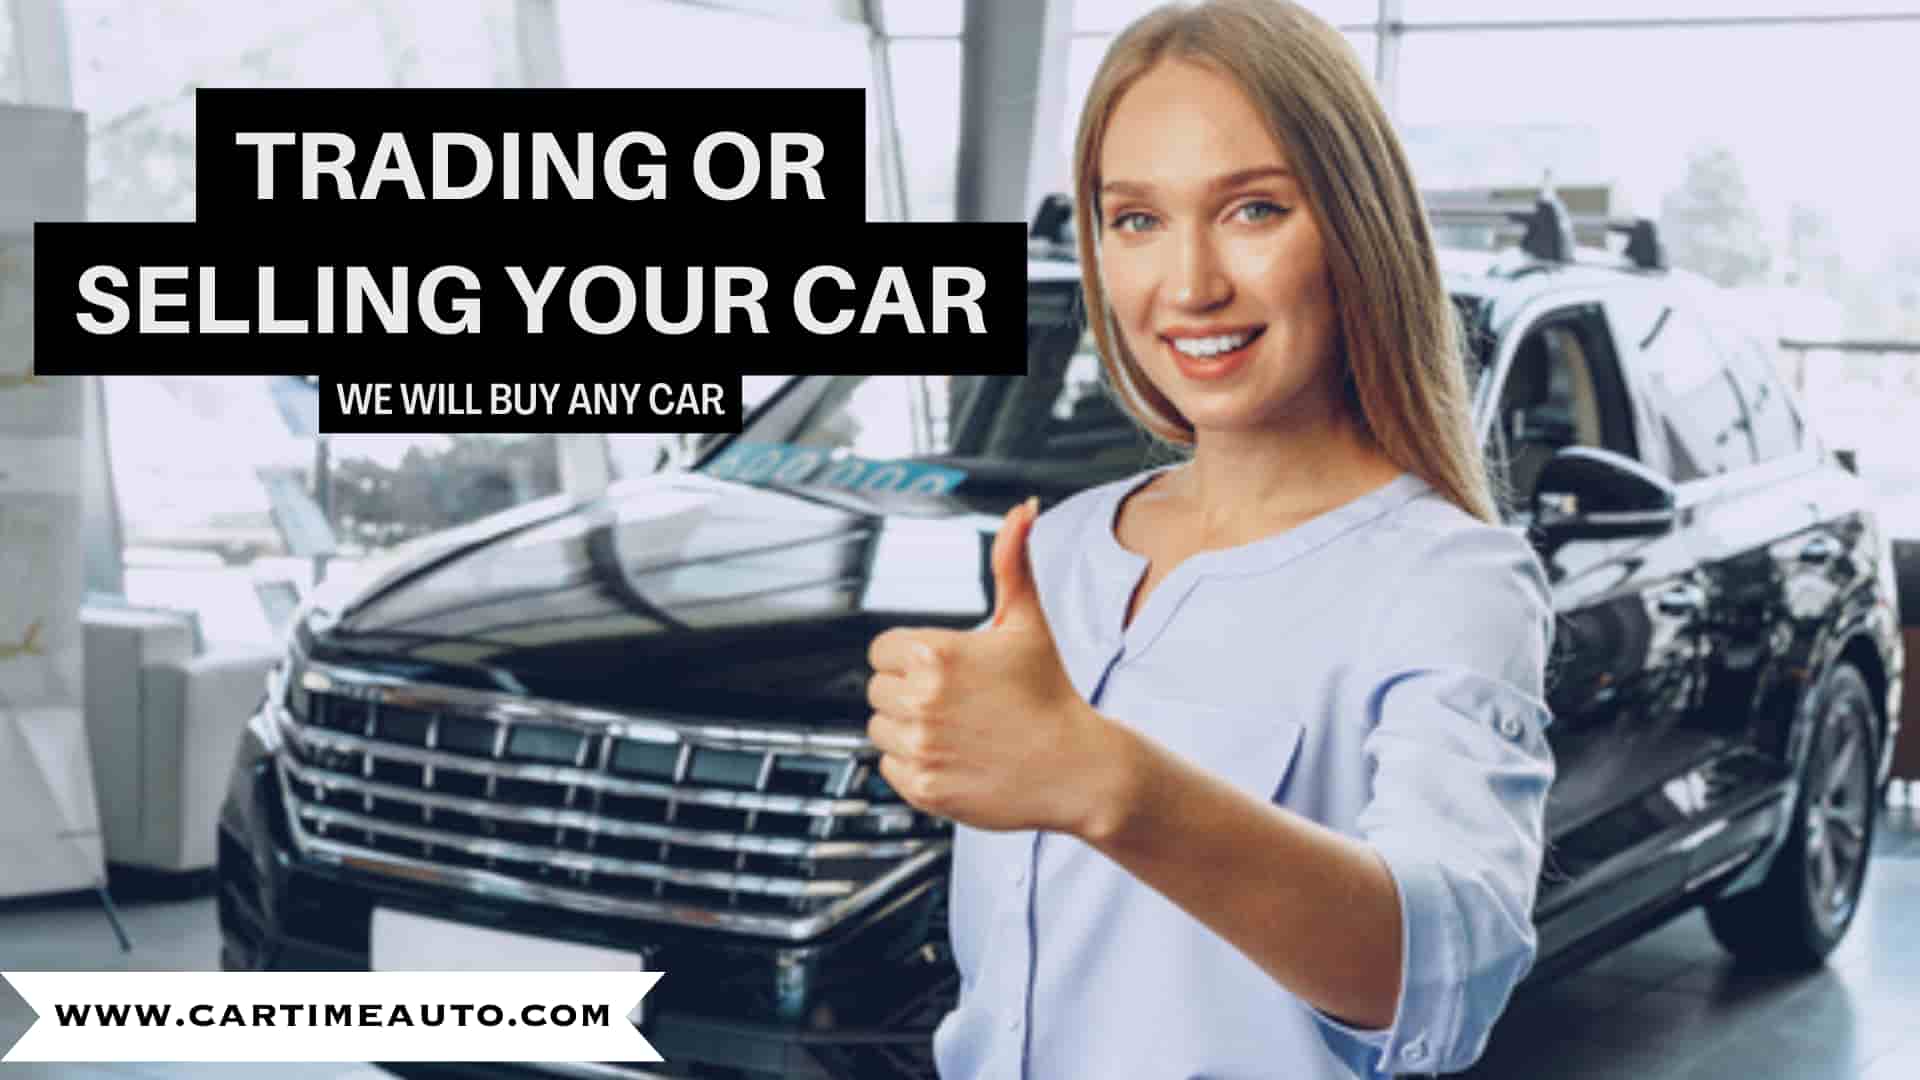 Woman showing thumbs up in a car dealership